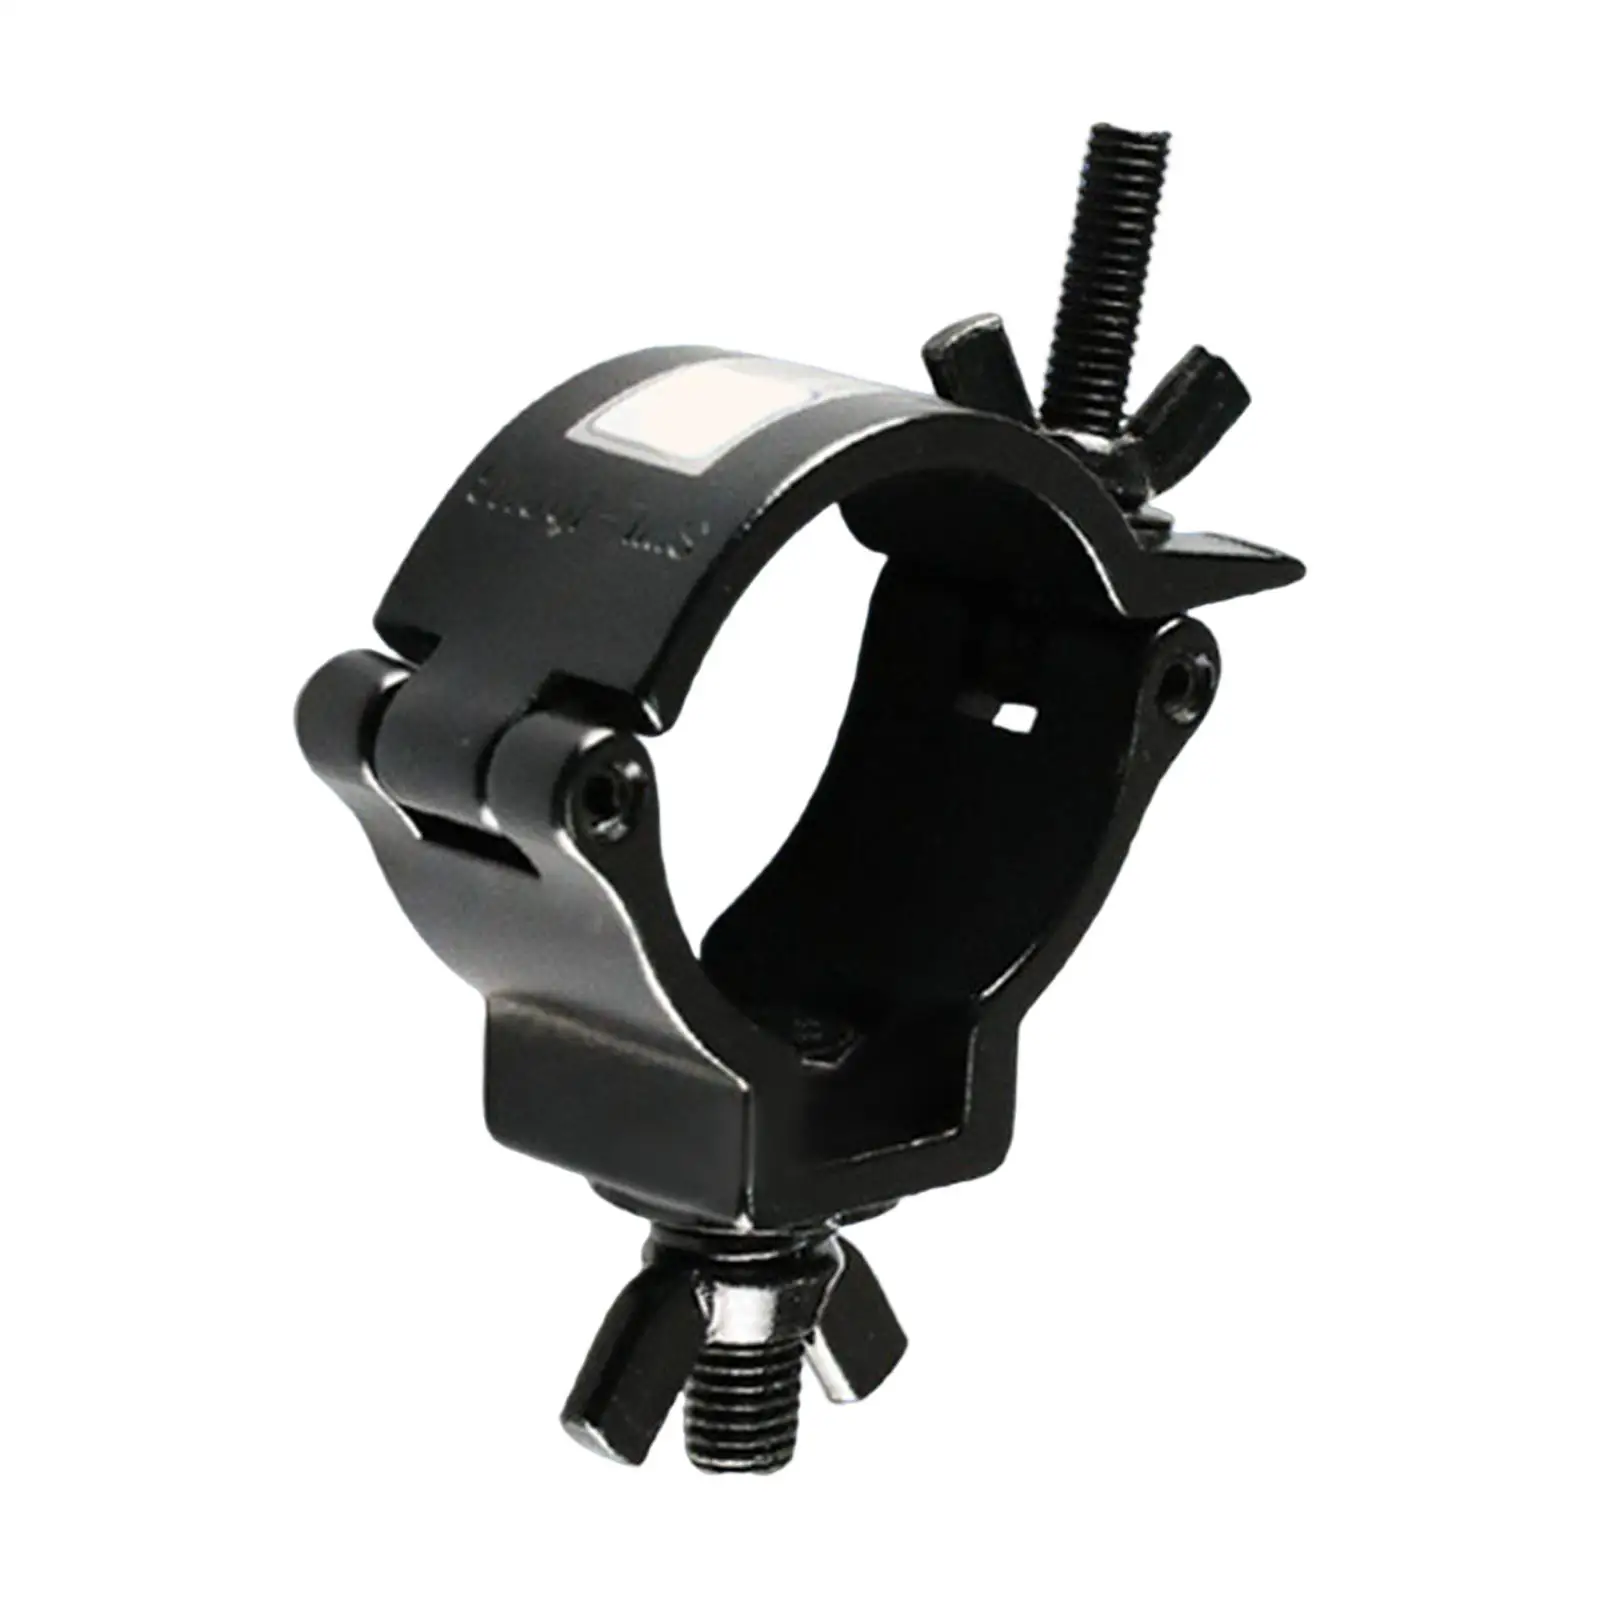 Aluminum Alloy Stage Lighting Mount Clamp Load 220lbs for 48-51mm Od Tubing/Pipe Moving Head Light Stand DJ Lighting